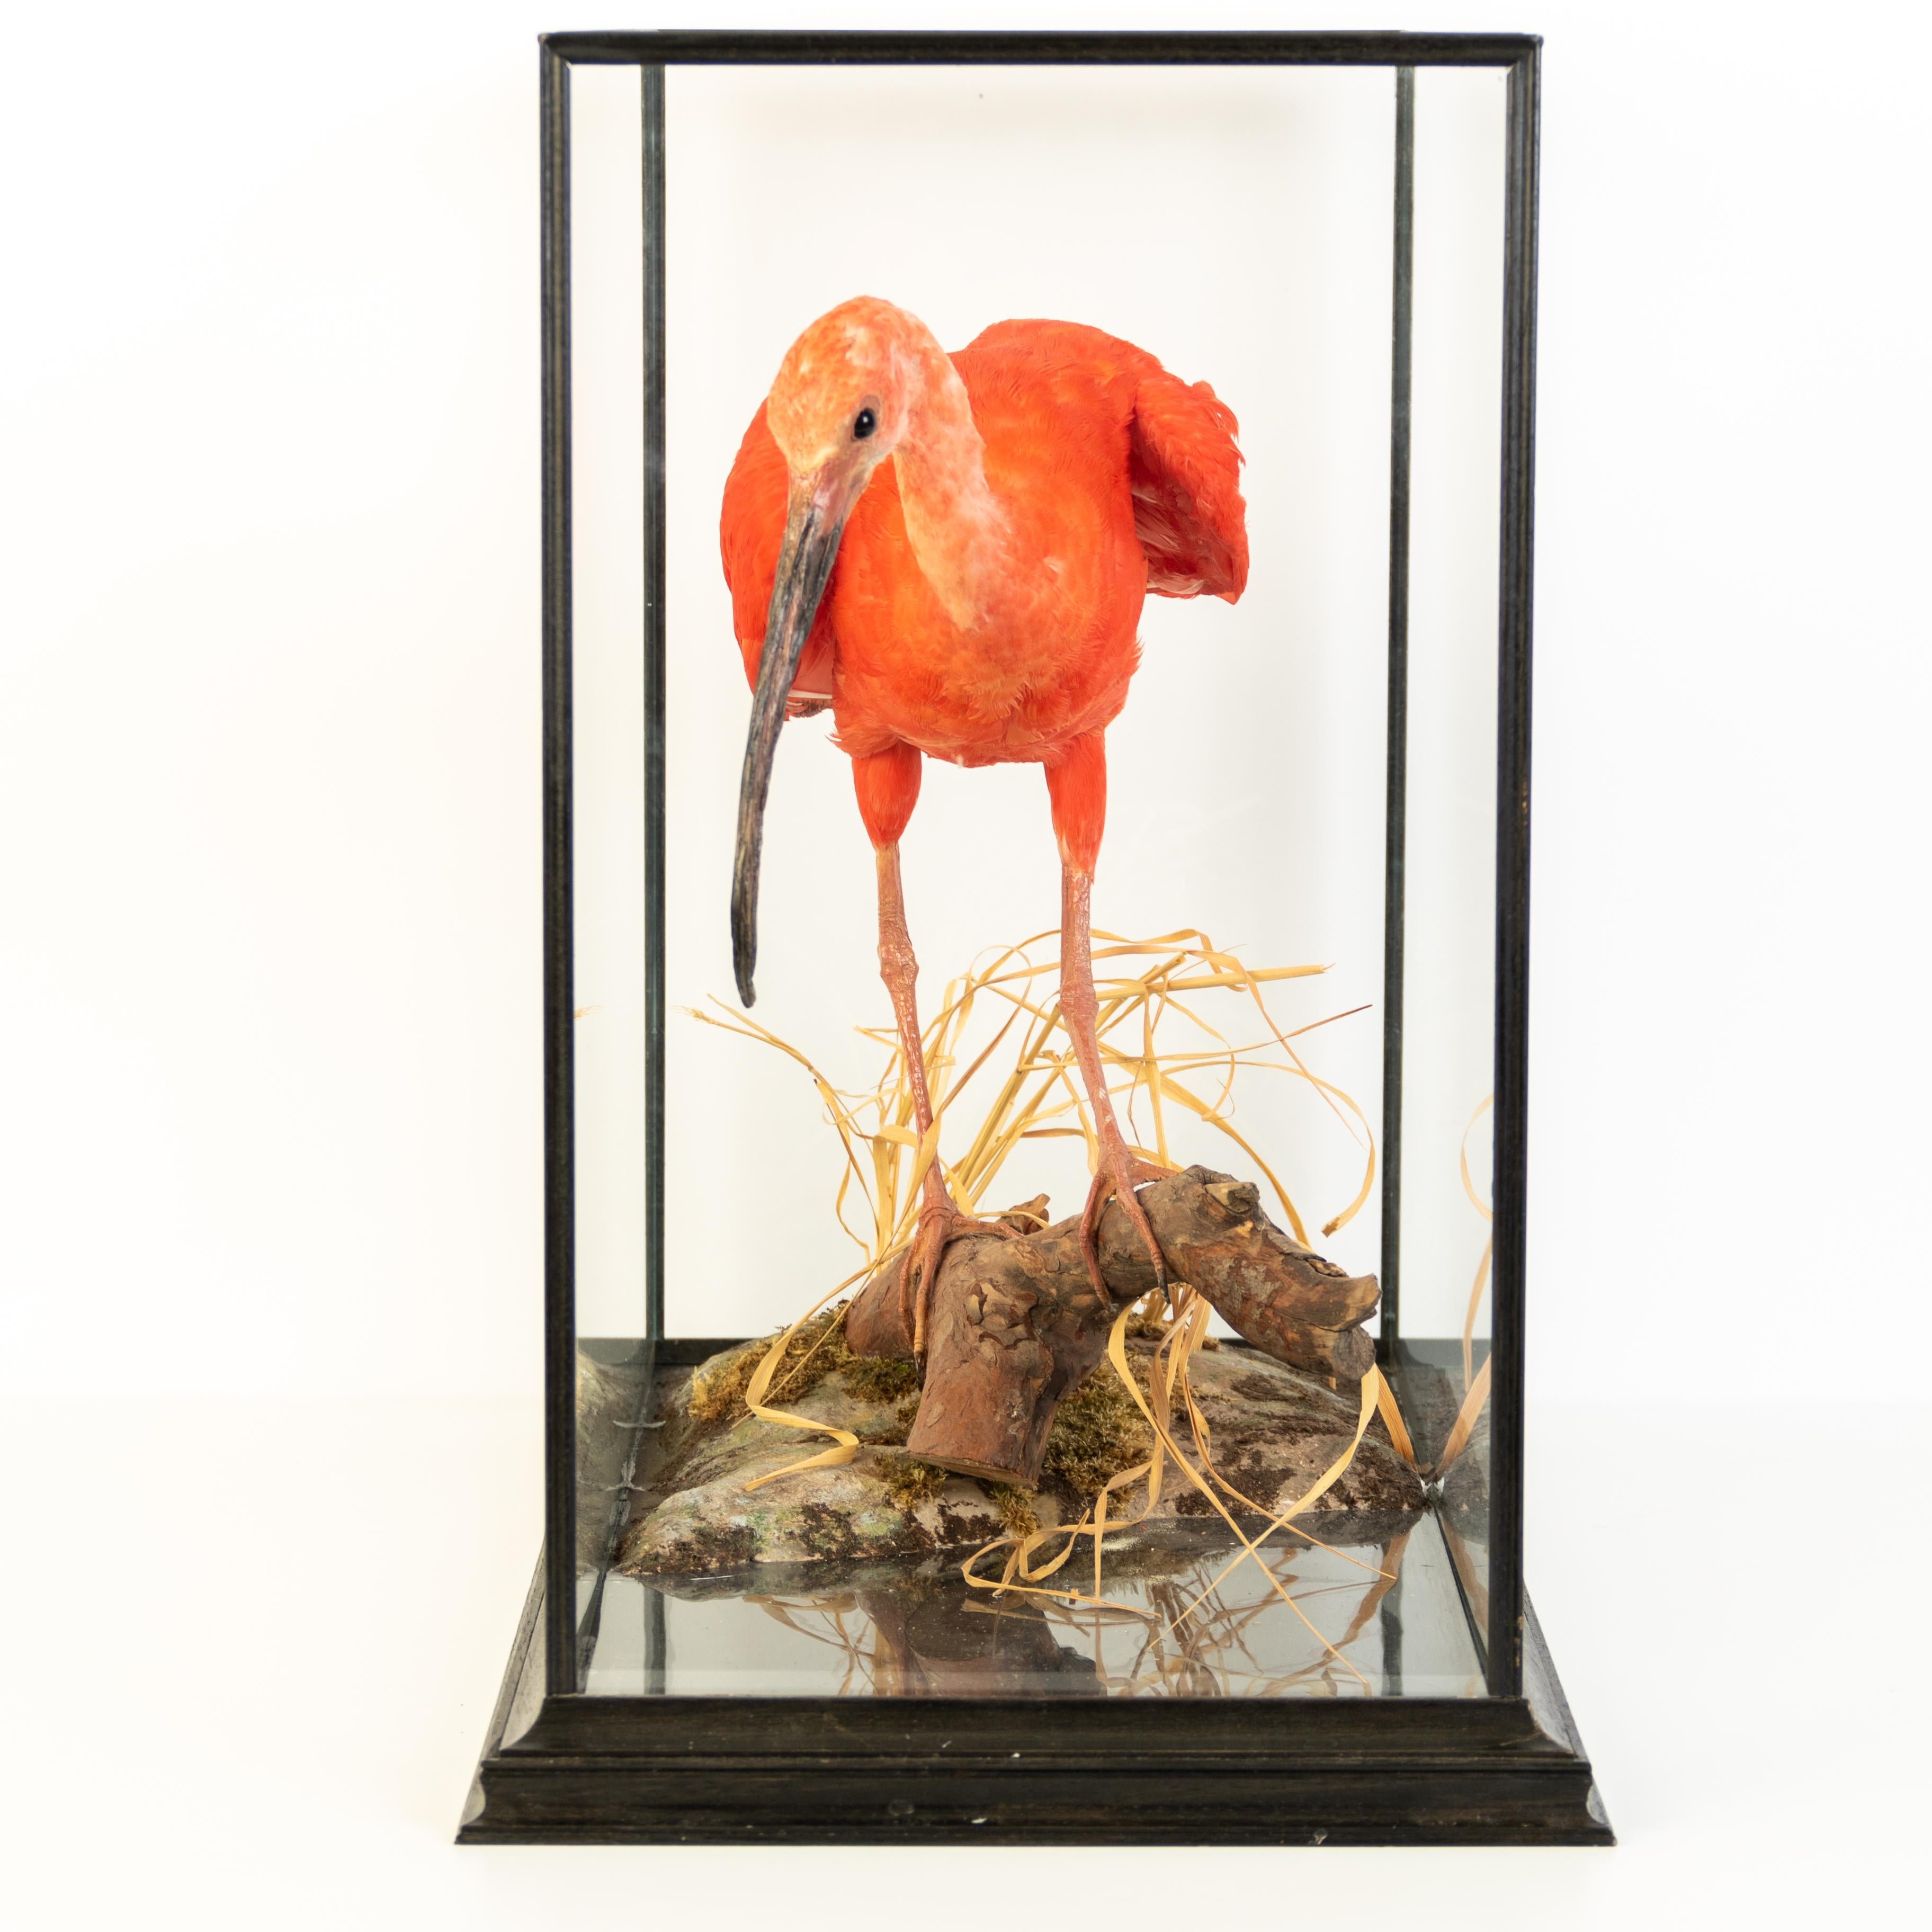 Scarlet Ibis (Eudocimus Ruber) Taxidermy Naturalistic Victorian Diorama Bird 

The Scarlet Ibis (Eudocimus ruber) is a species of bird native to parts of South America, including northern South America, Venezuela, and the islands of the Caribbean.